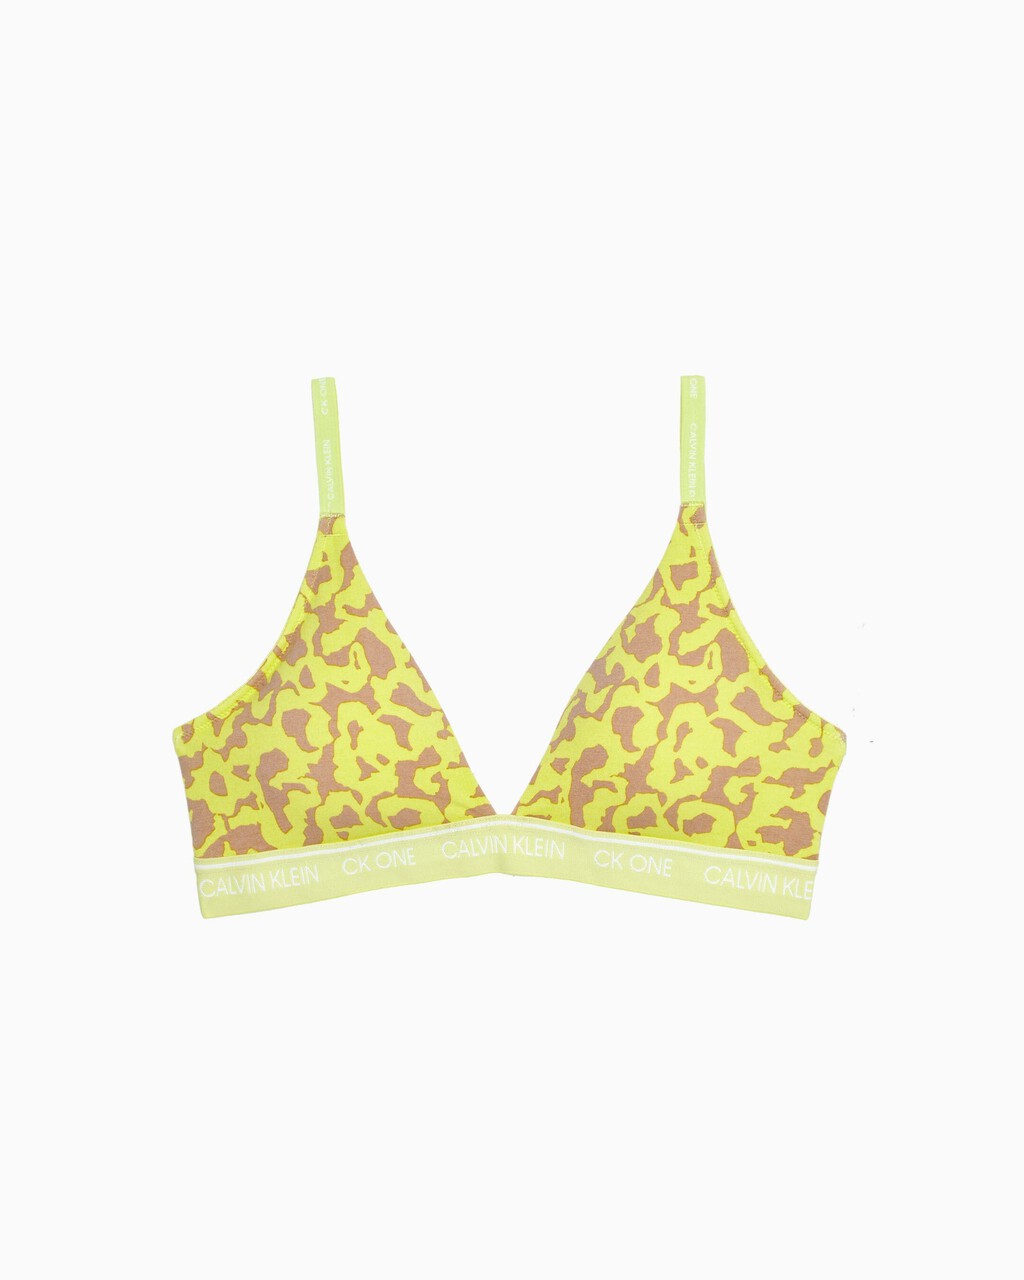 CK One Cotton Lightly Lined Triangle Bra, yellow